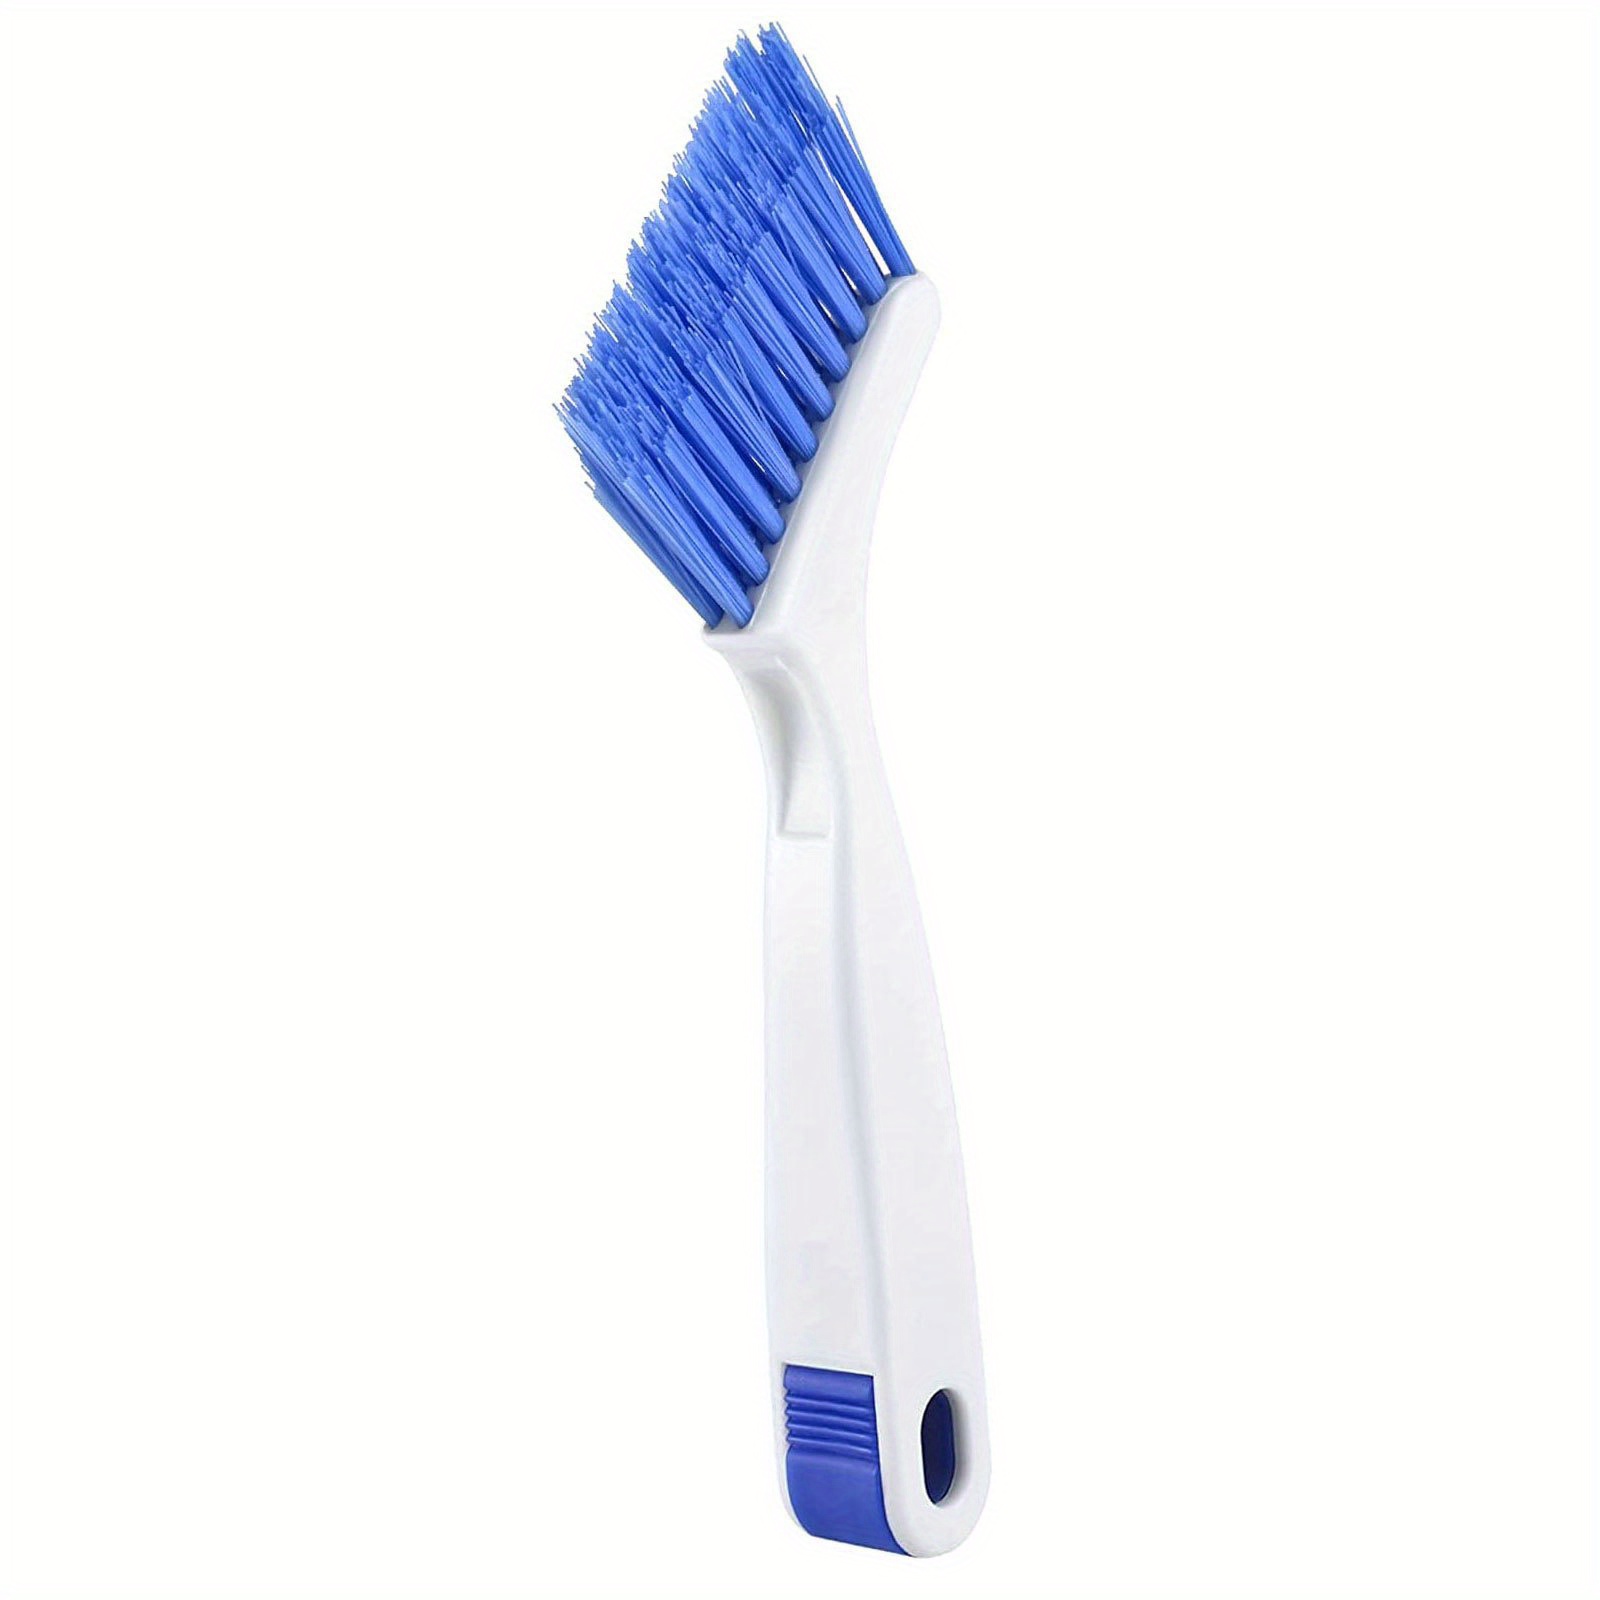 XMMSWDLA Cleaning Brush Small Scrub Brush for Cleaning Bottle Sink Kitchen  Brush, Edge Corner Grout Bathroom Cleaning Brushes, Sliding Door or Window Cleaning  Brush 